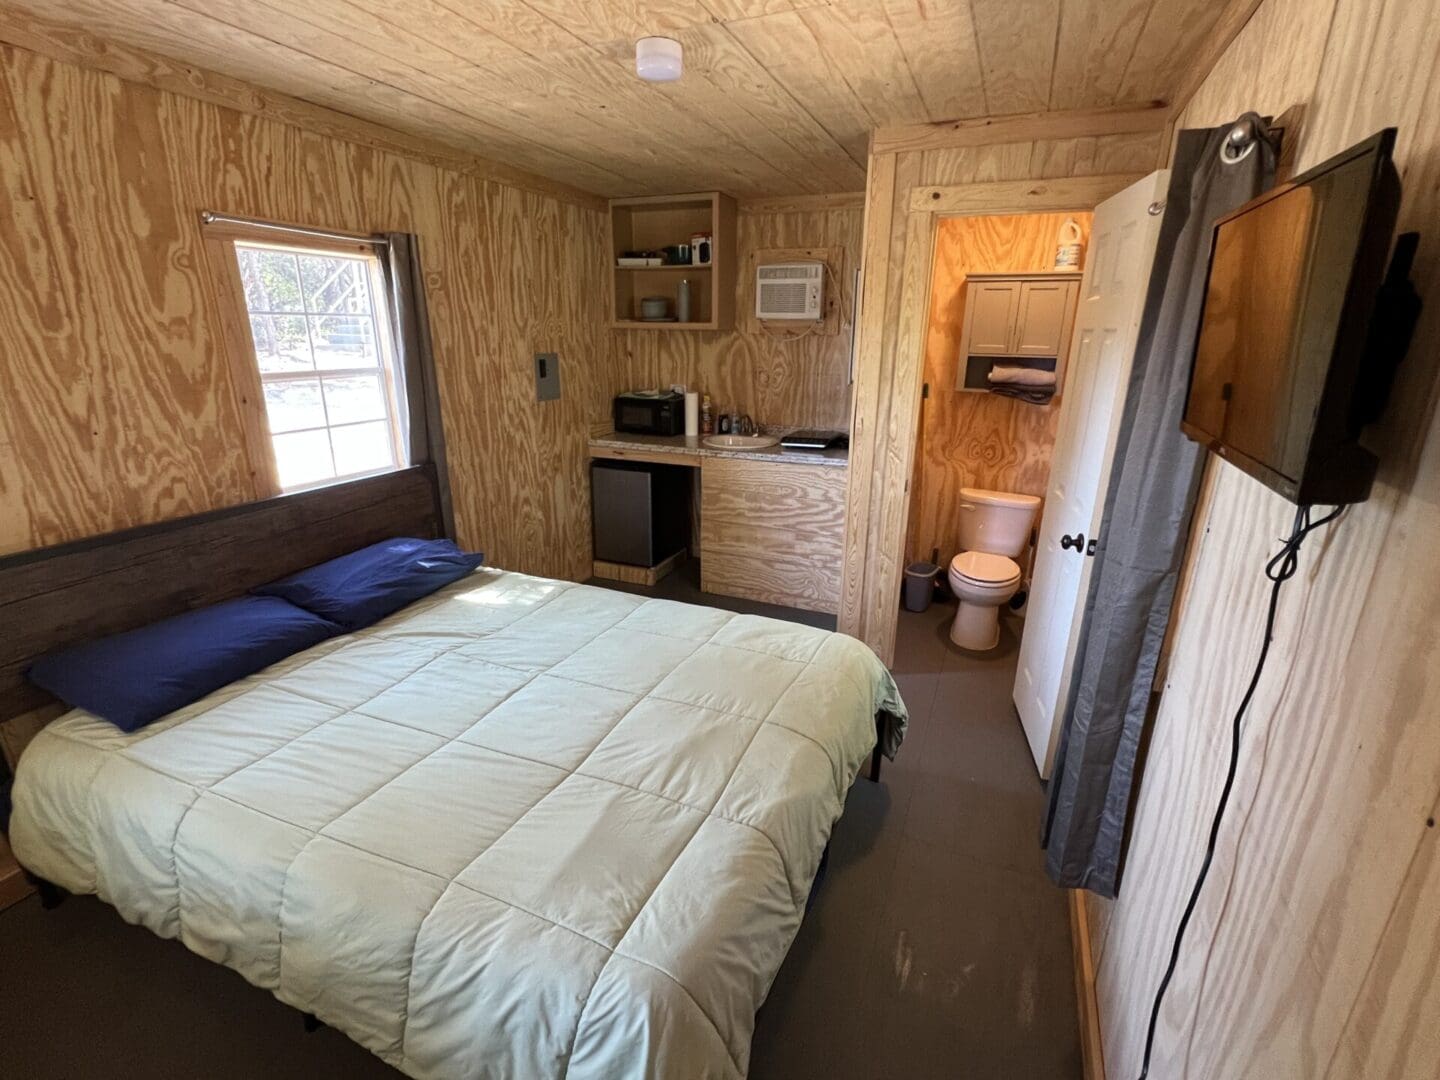 A bedroom with a bed, toilet and sink.